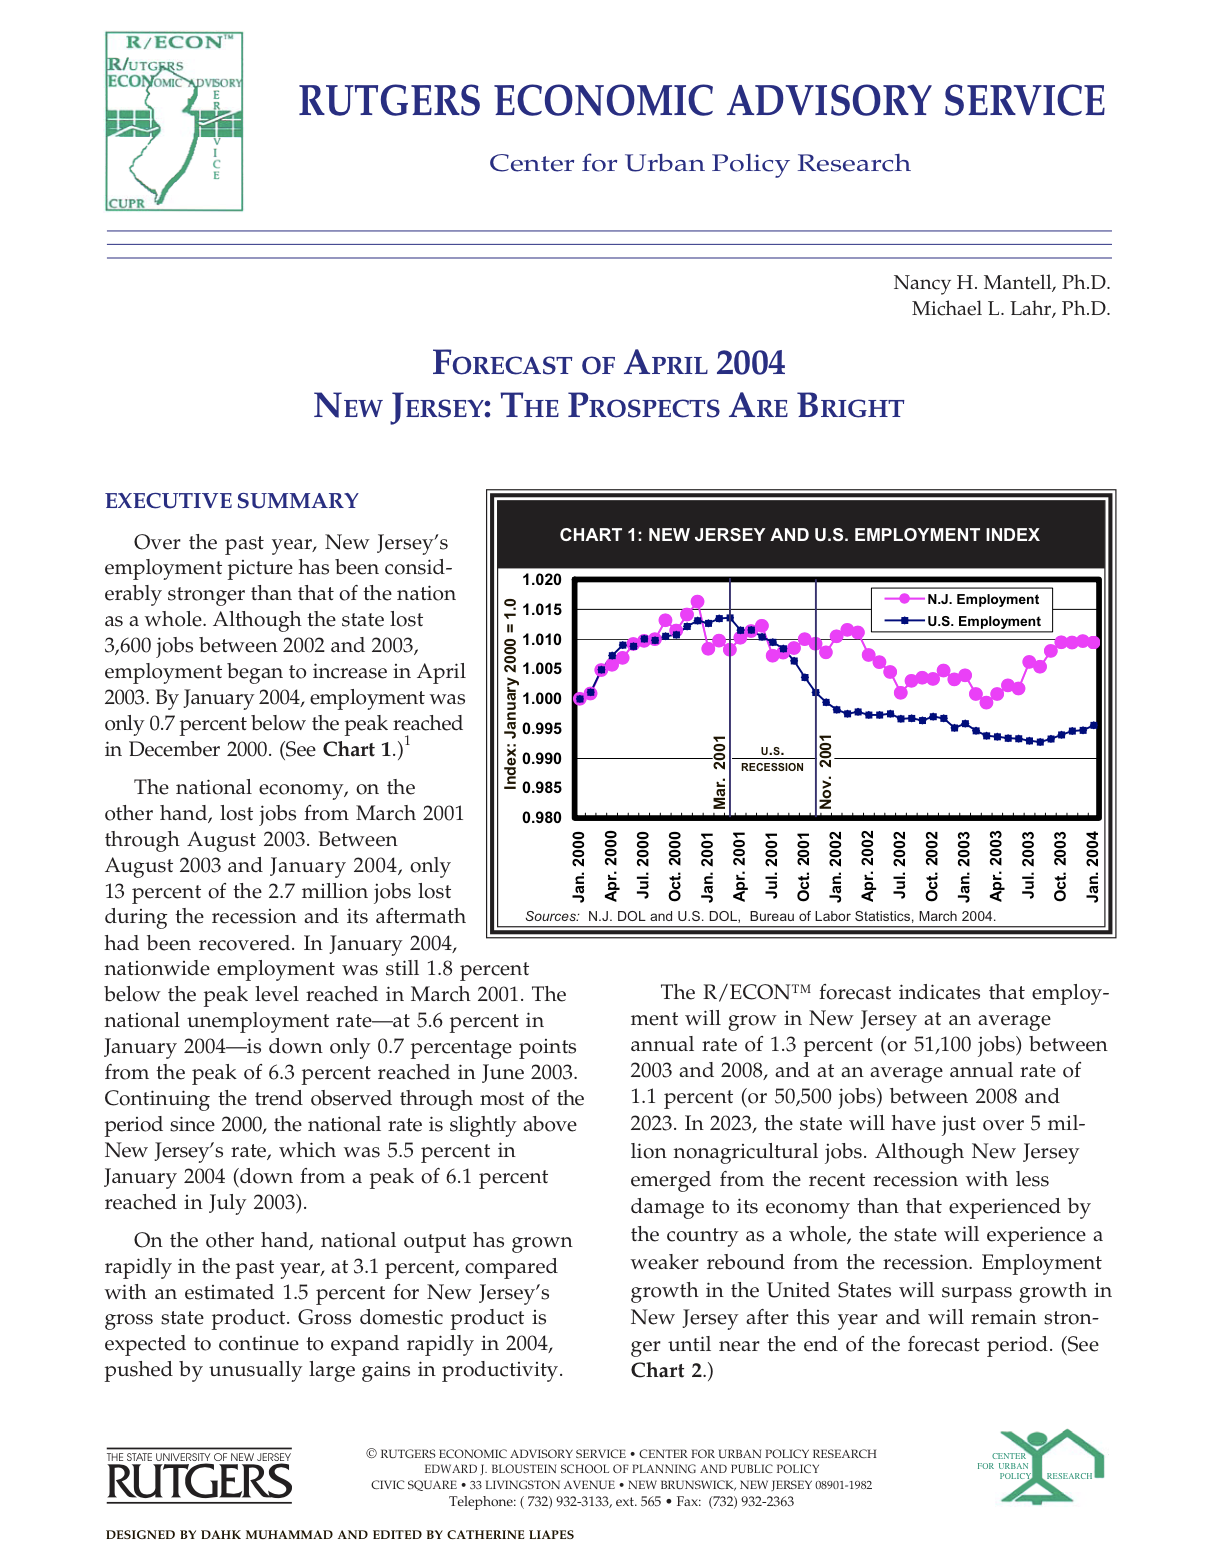 Mantell, N.H., Lahr, M.L. (2004). Forecast of April 2004 New Jersey: The Prospects Are Bright. Rutgers Economic Advisory Service. Center for Urban Policy Research at the Edward J. Bloustein School of Planning and Public Policy.